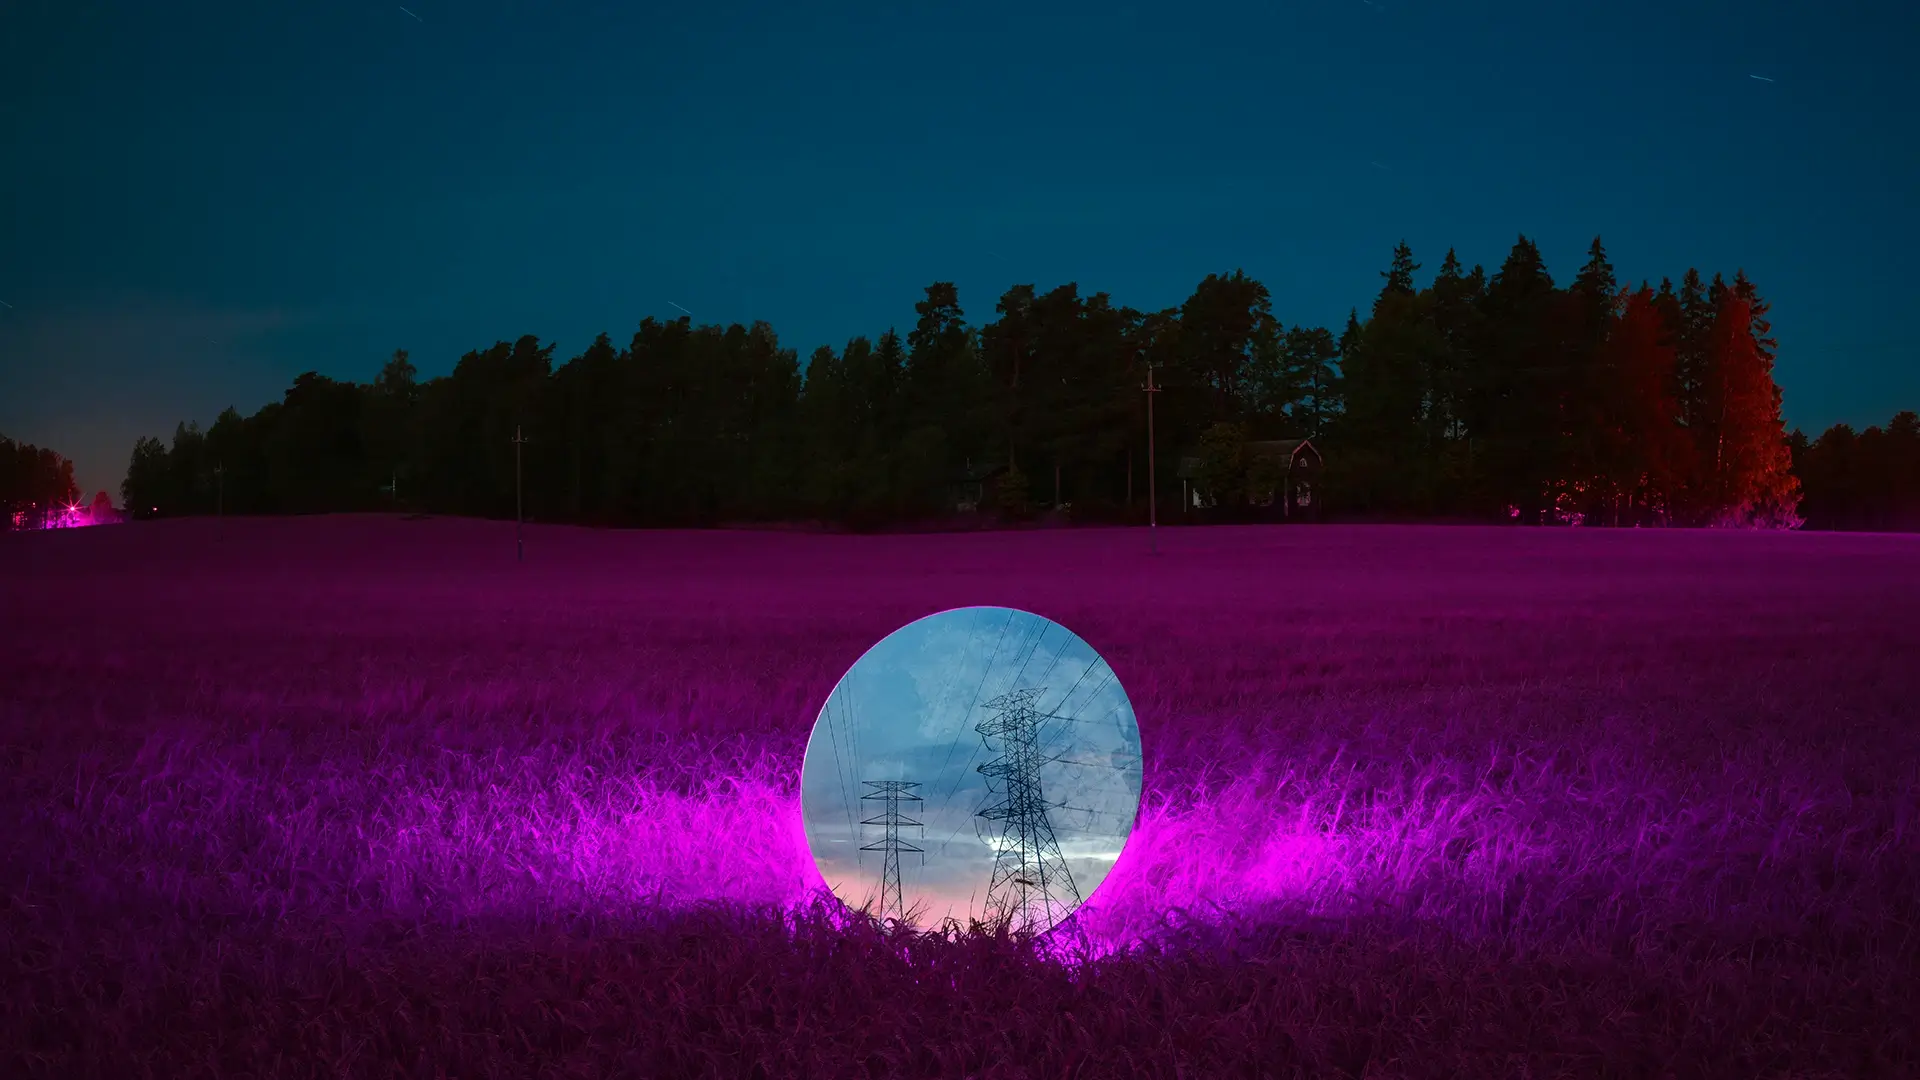 Futuristic glowing orb with electric towers and power lines